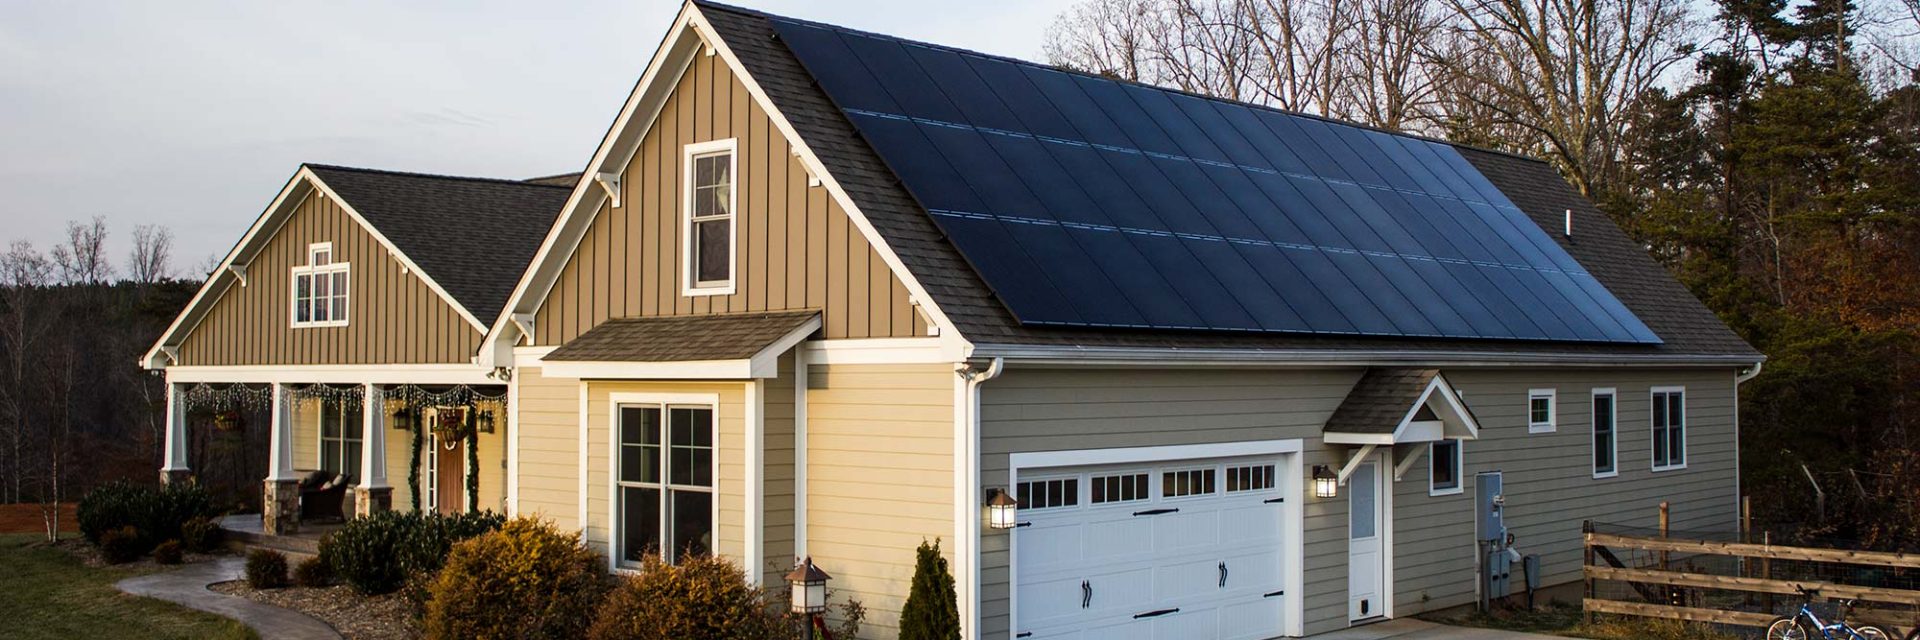 Beautiful solar panels installed on roof in Virginia